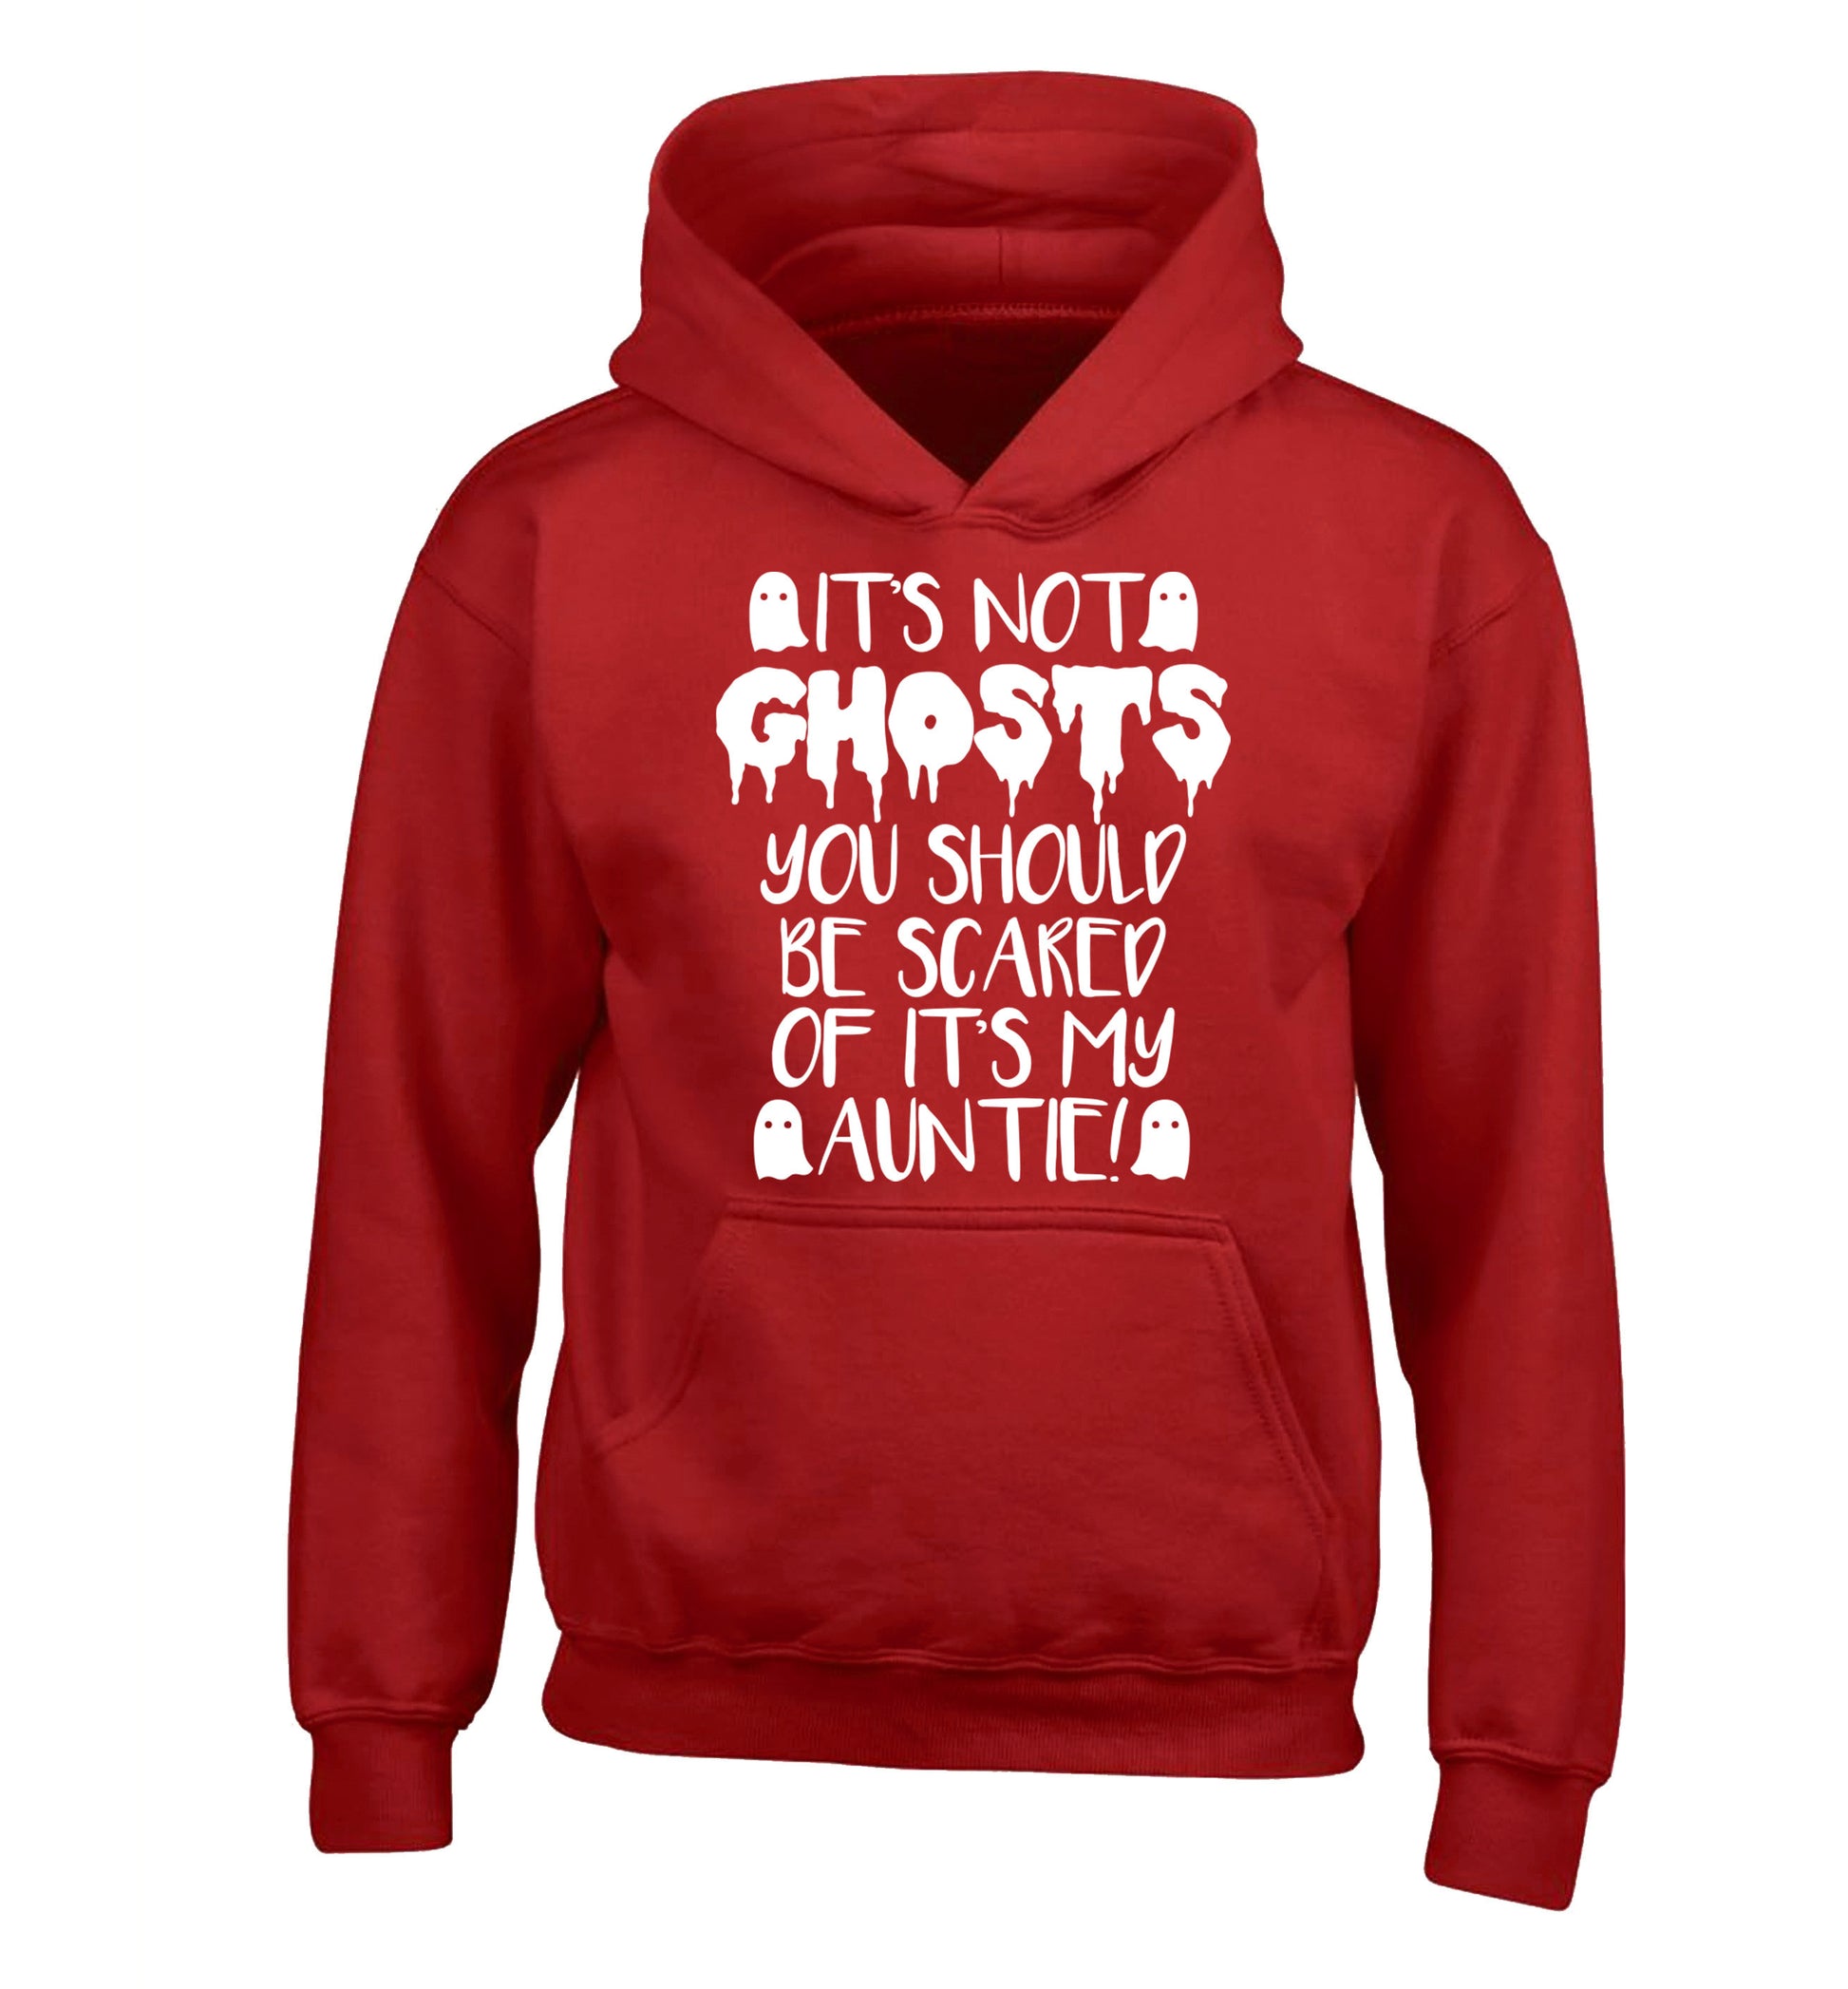 It's not ghosts you should be scared of it's my auntie! children's red hoodie 12-14 Years